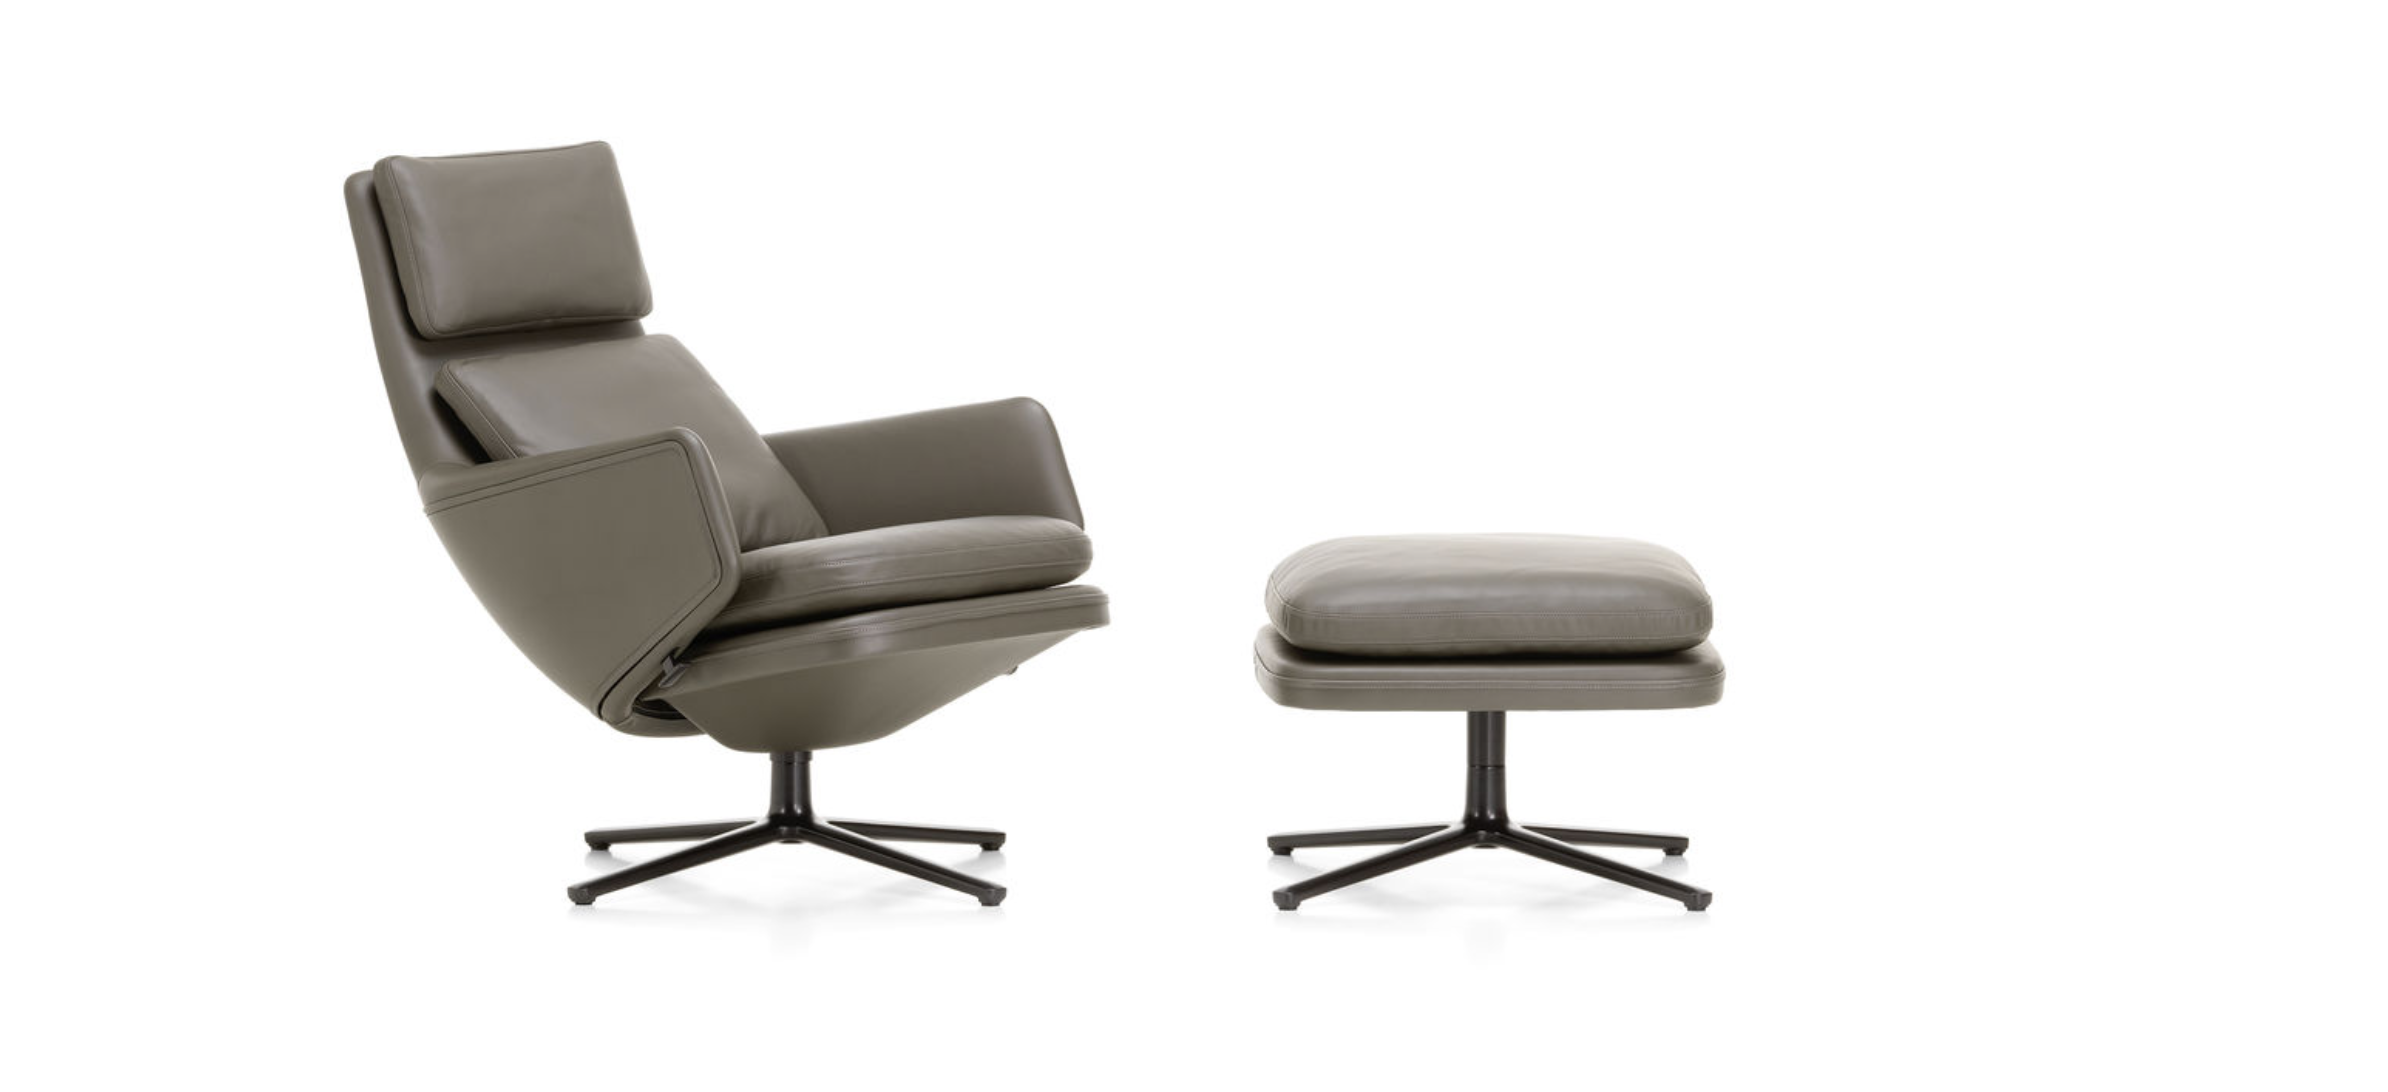 Grand Relax armchair from Vitra by Antonio Cittero in our design furniture stores in Hasselt Mechelen Leuven Zoutleeuw Sint-Truiden Wavre Liege Namur intieur official vitra distributor store Loncin .png